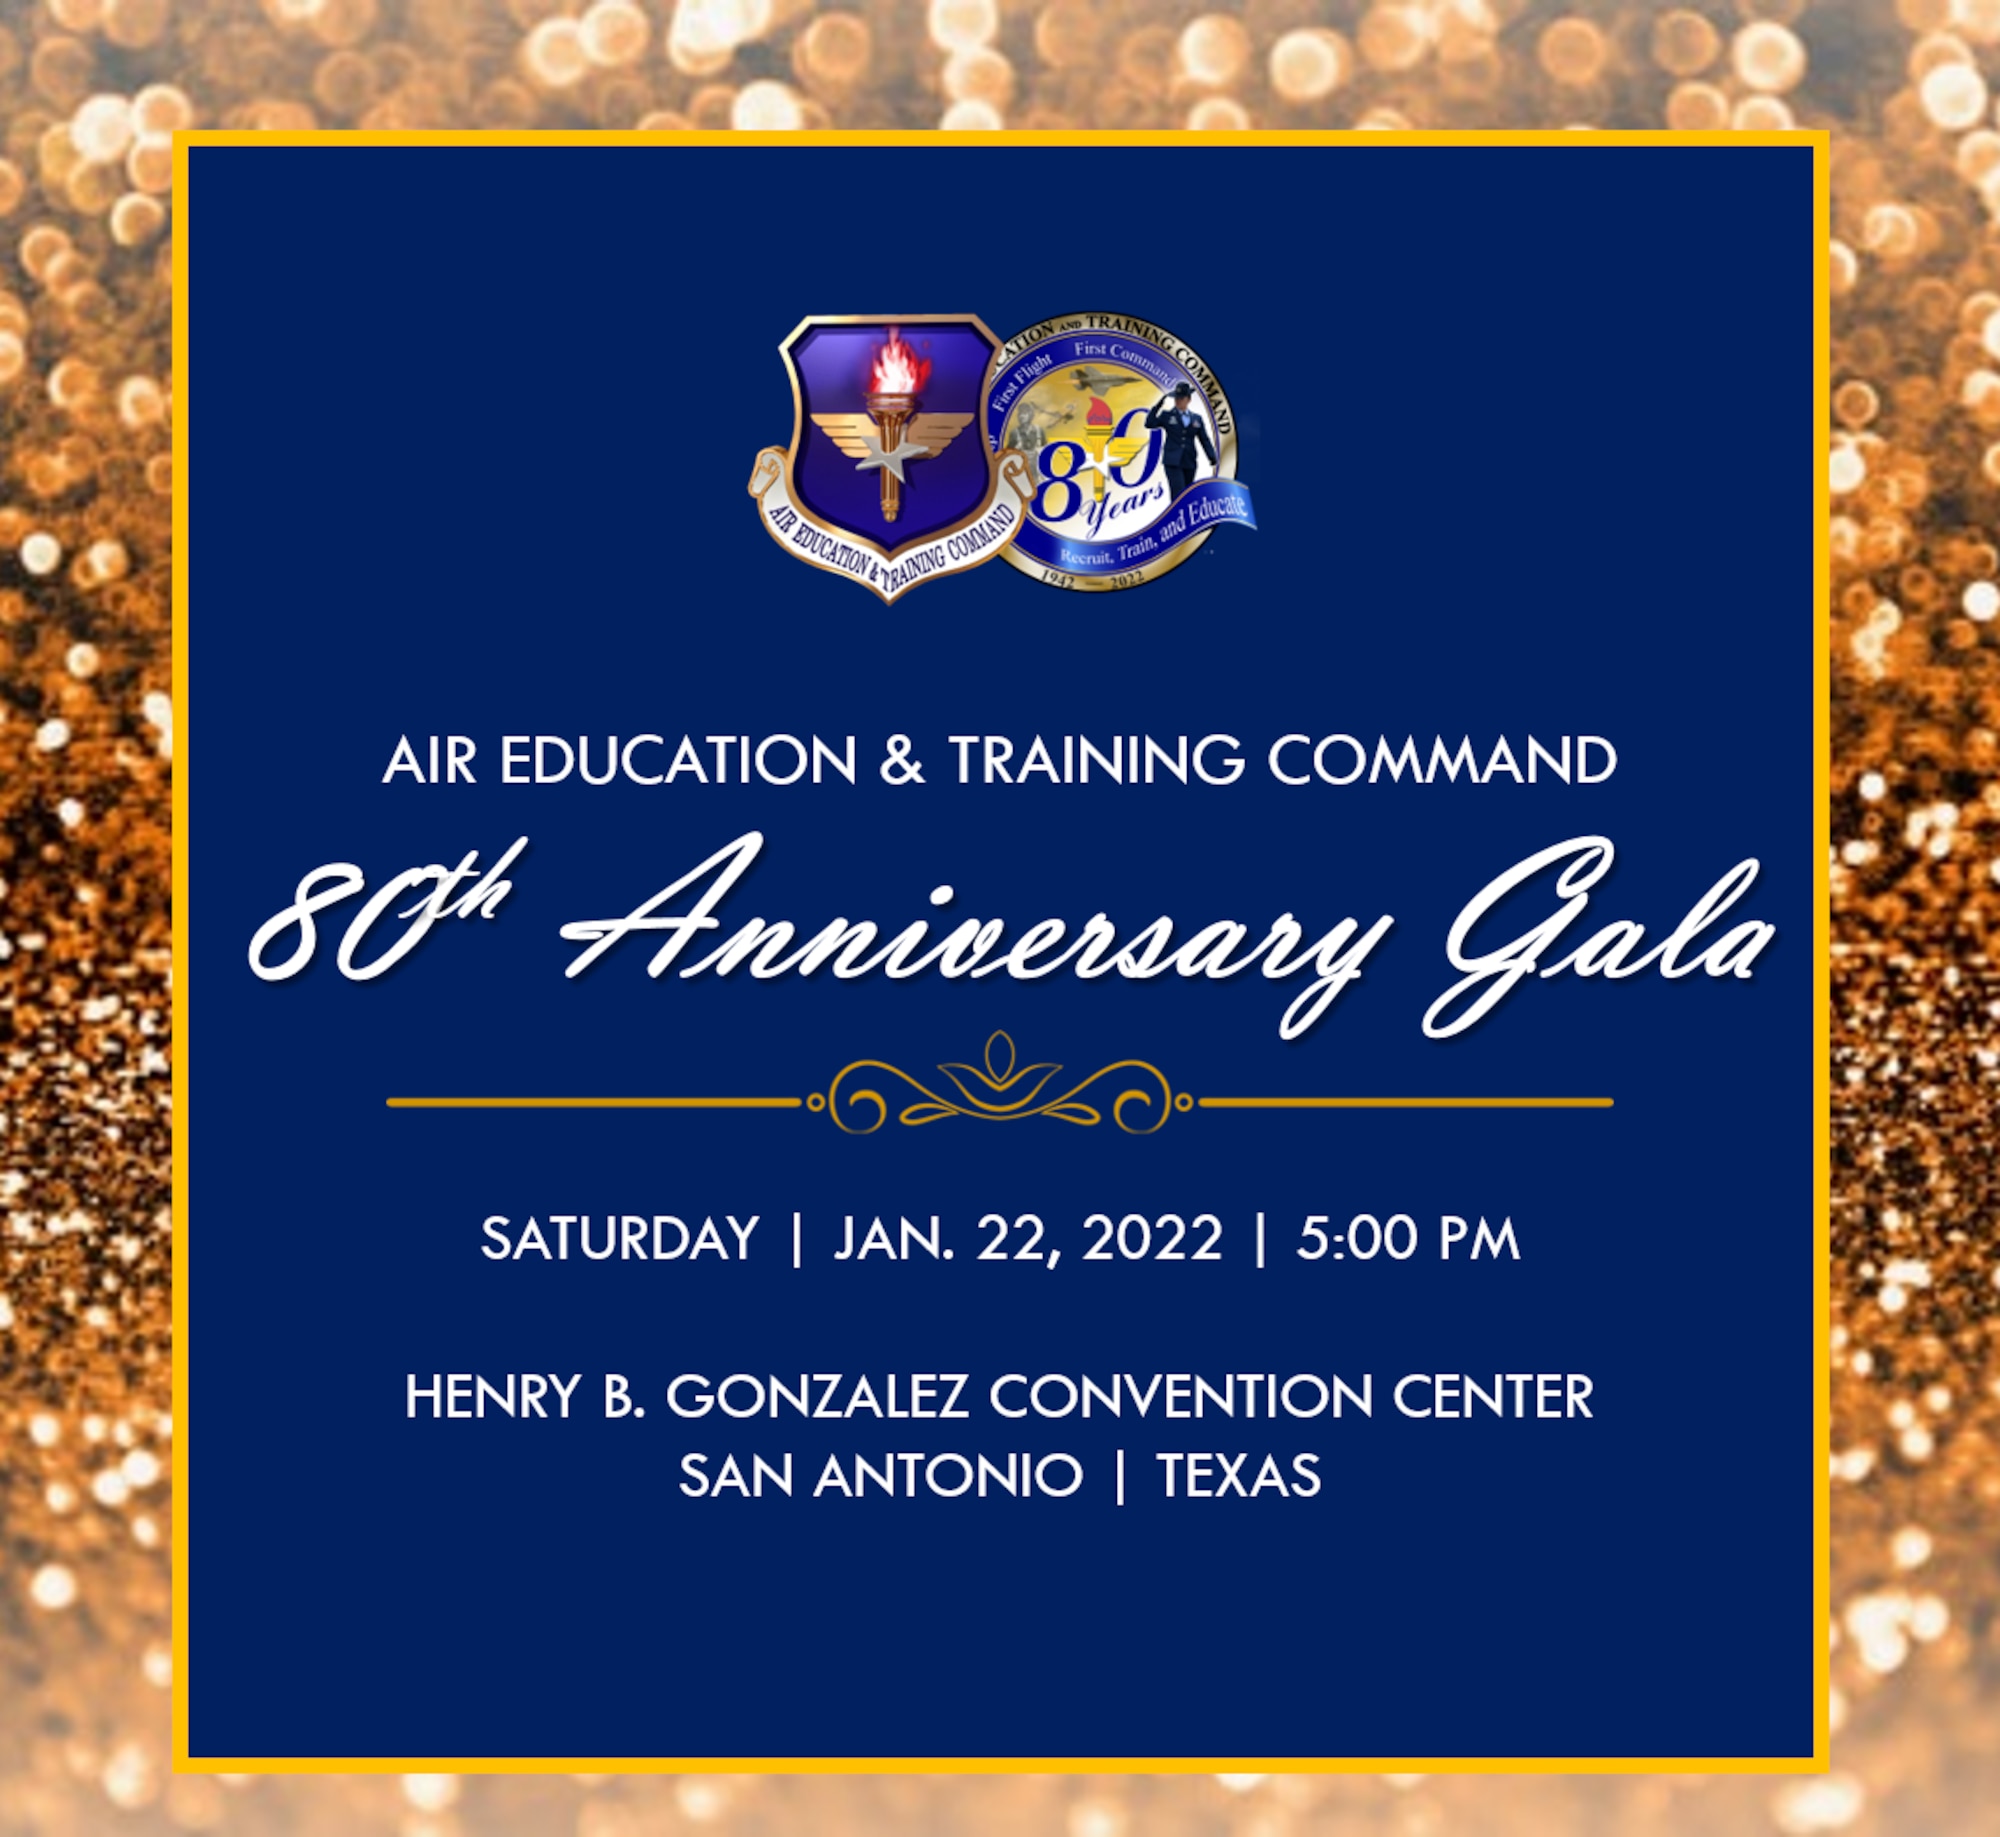 Mark your calendars for Air Education and Training Command’s 80th Anniversary Gala, Jan. 22, 2022 at 5 p.m. at the Henry B. Gonzalez Convention Center in San Antonio, Texas. The event will feature a prominent Air Force leader as the keynote speaker, and a live performance by Velocity of U.S. Air Force Band of the West. Also, emceeing the event will be celebrity media personality, Elizabeth Ruiz, a 40-year veteran radio icon and San Antonio Radio Hall of Fame inductee. (U.S. Air Force graphic by Capt. Kenya Pettway)